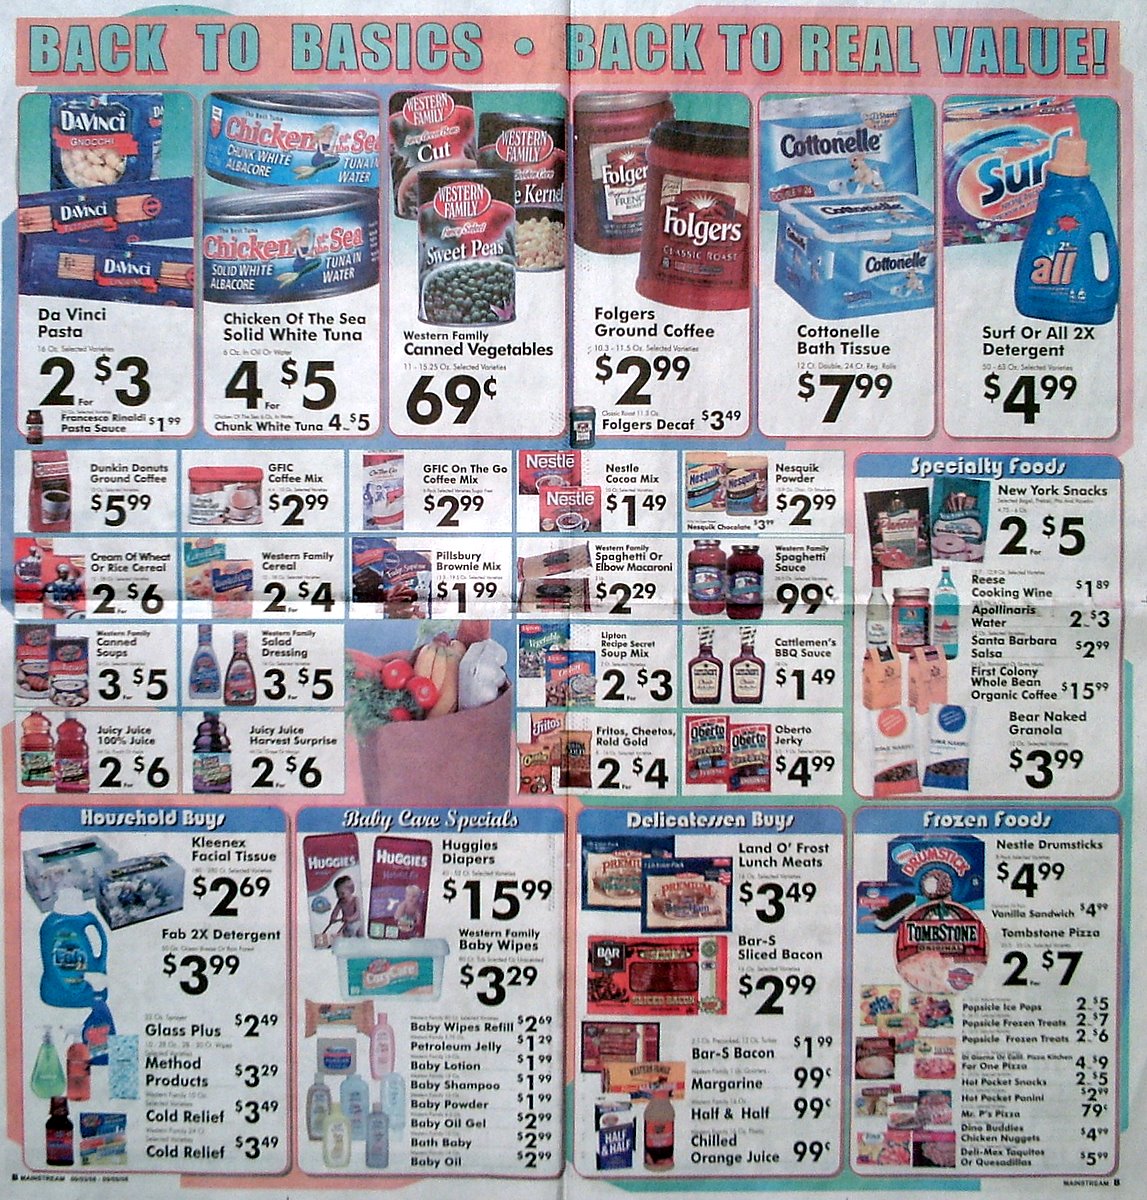 Photo Album: Big Trees Market Weekly Ad for September 3-9, 2008